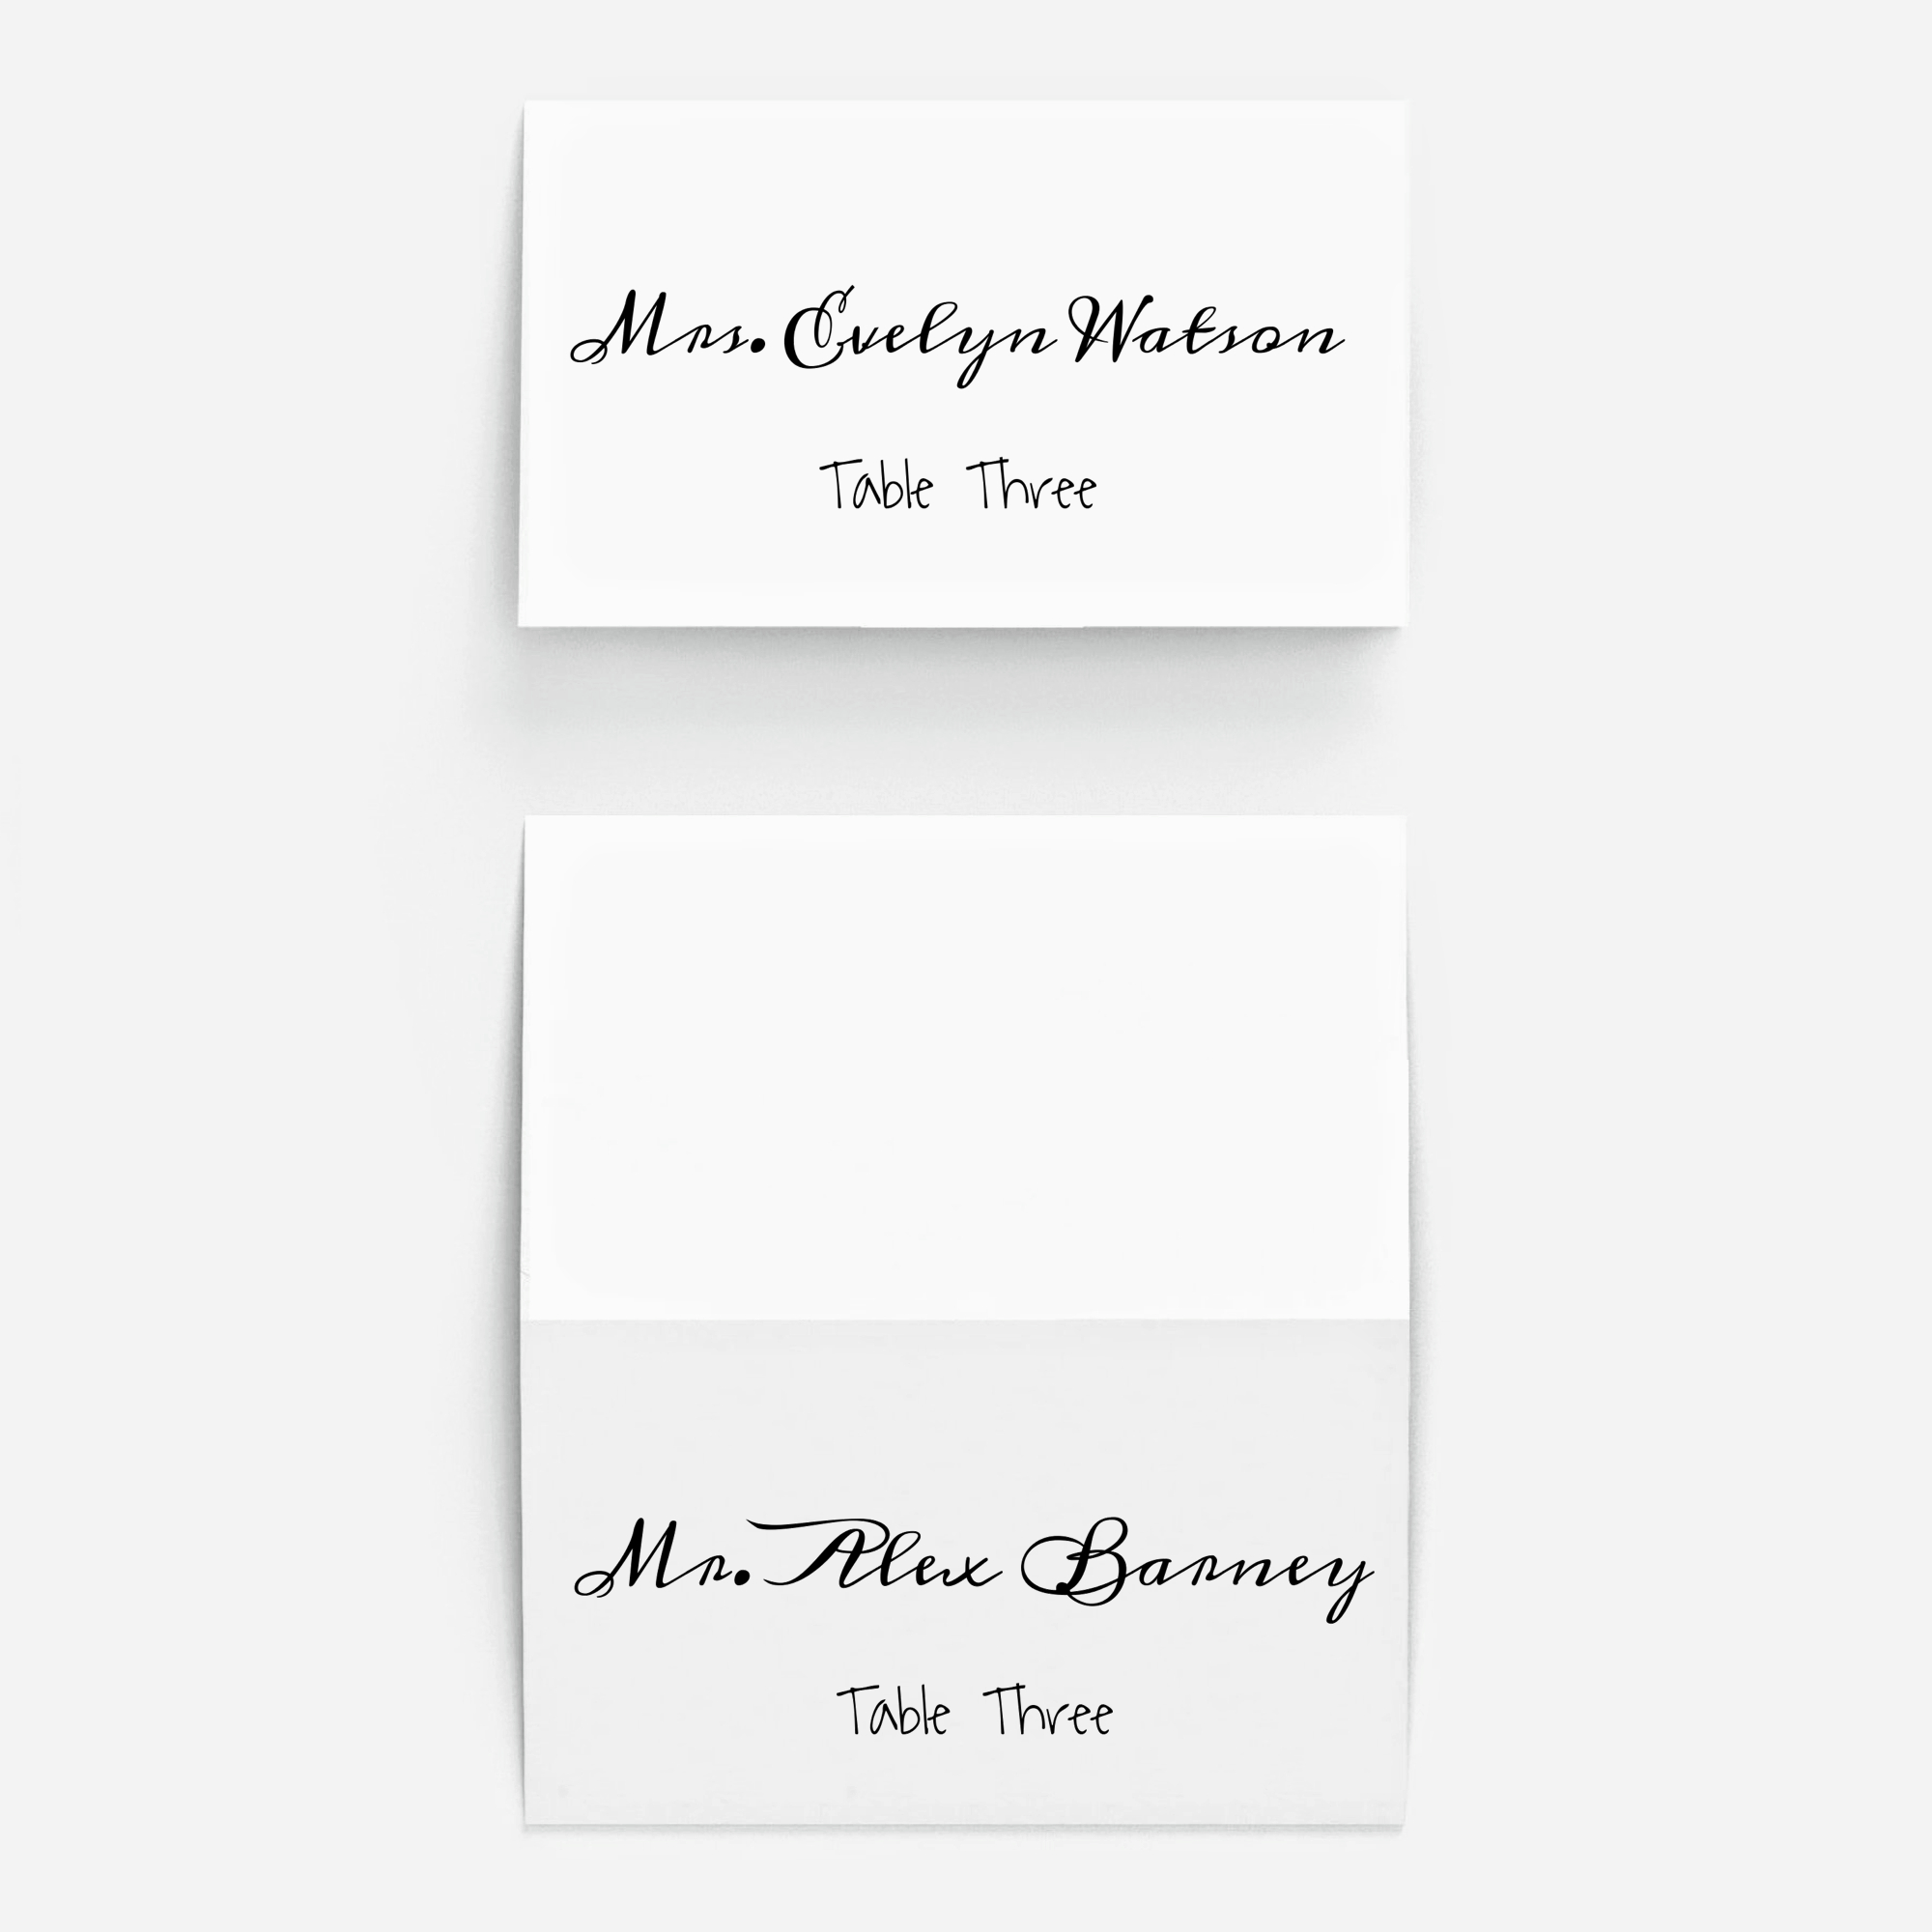 Pinplace Cards Online On 10 Stunning Fonts For Diy With Celebrate It Templates Place Cards